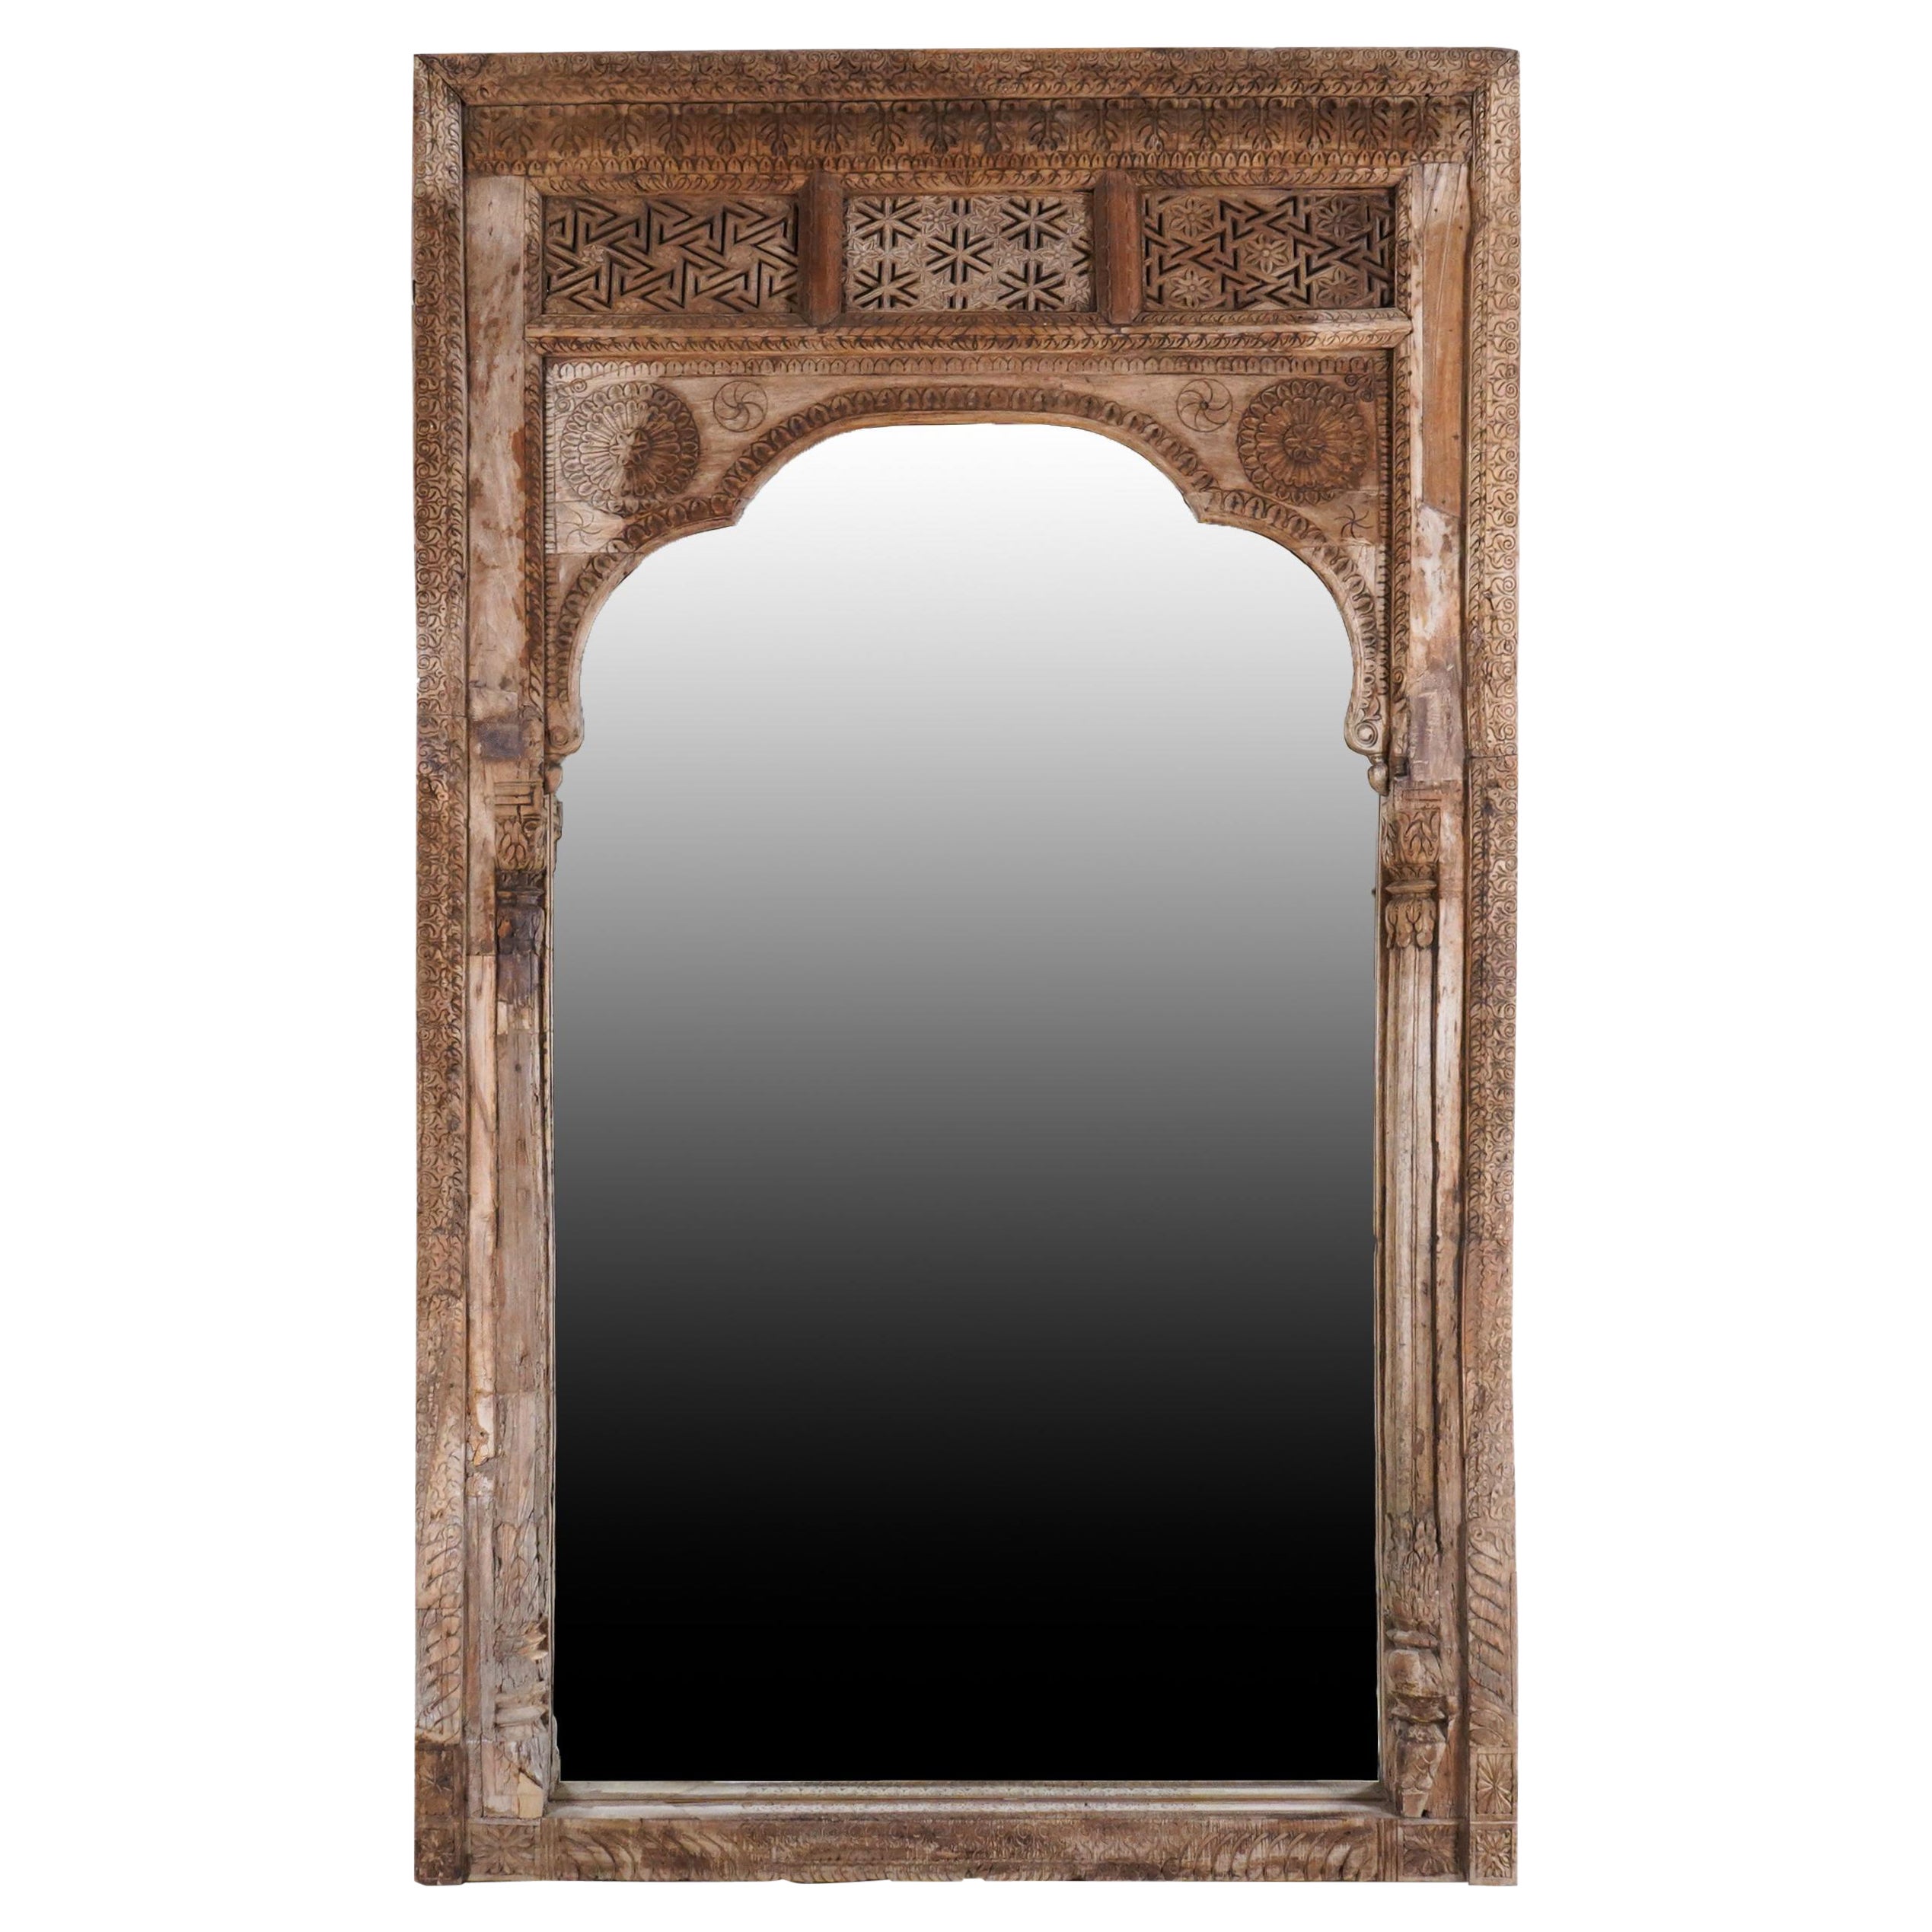 A Carved Mirror Frame